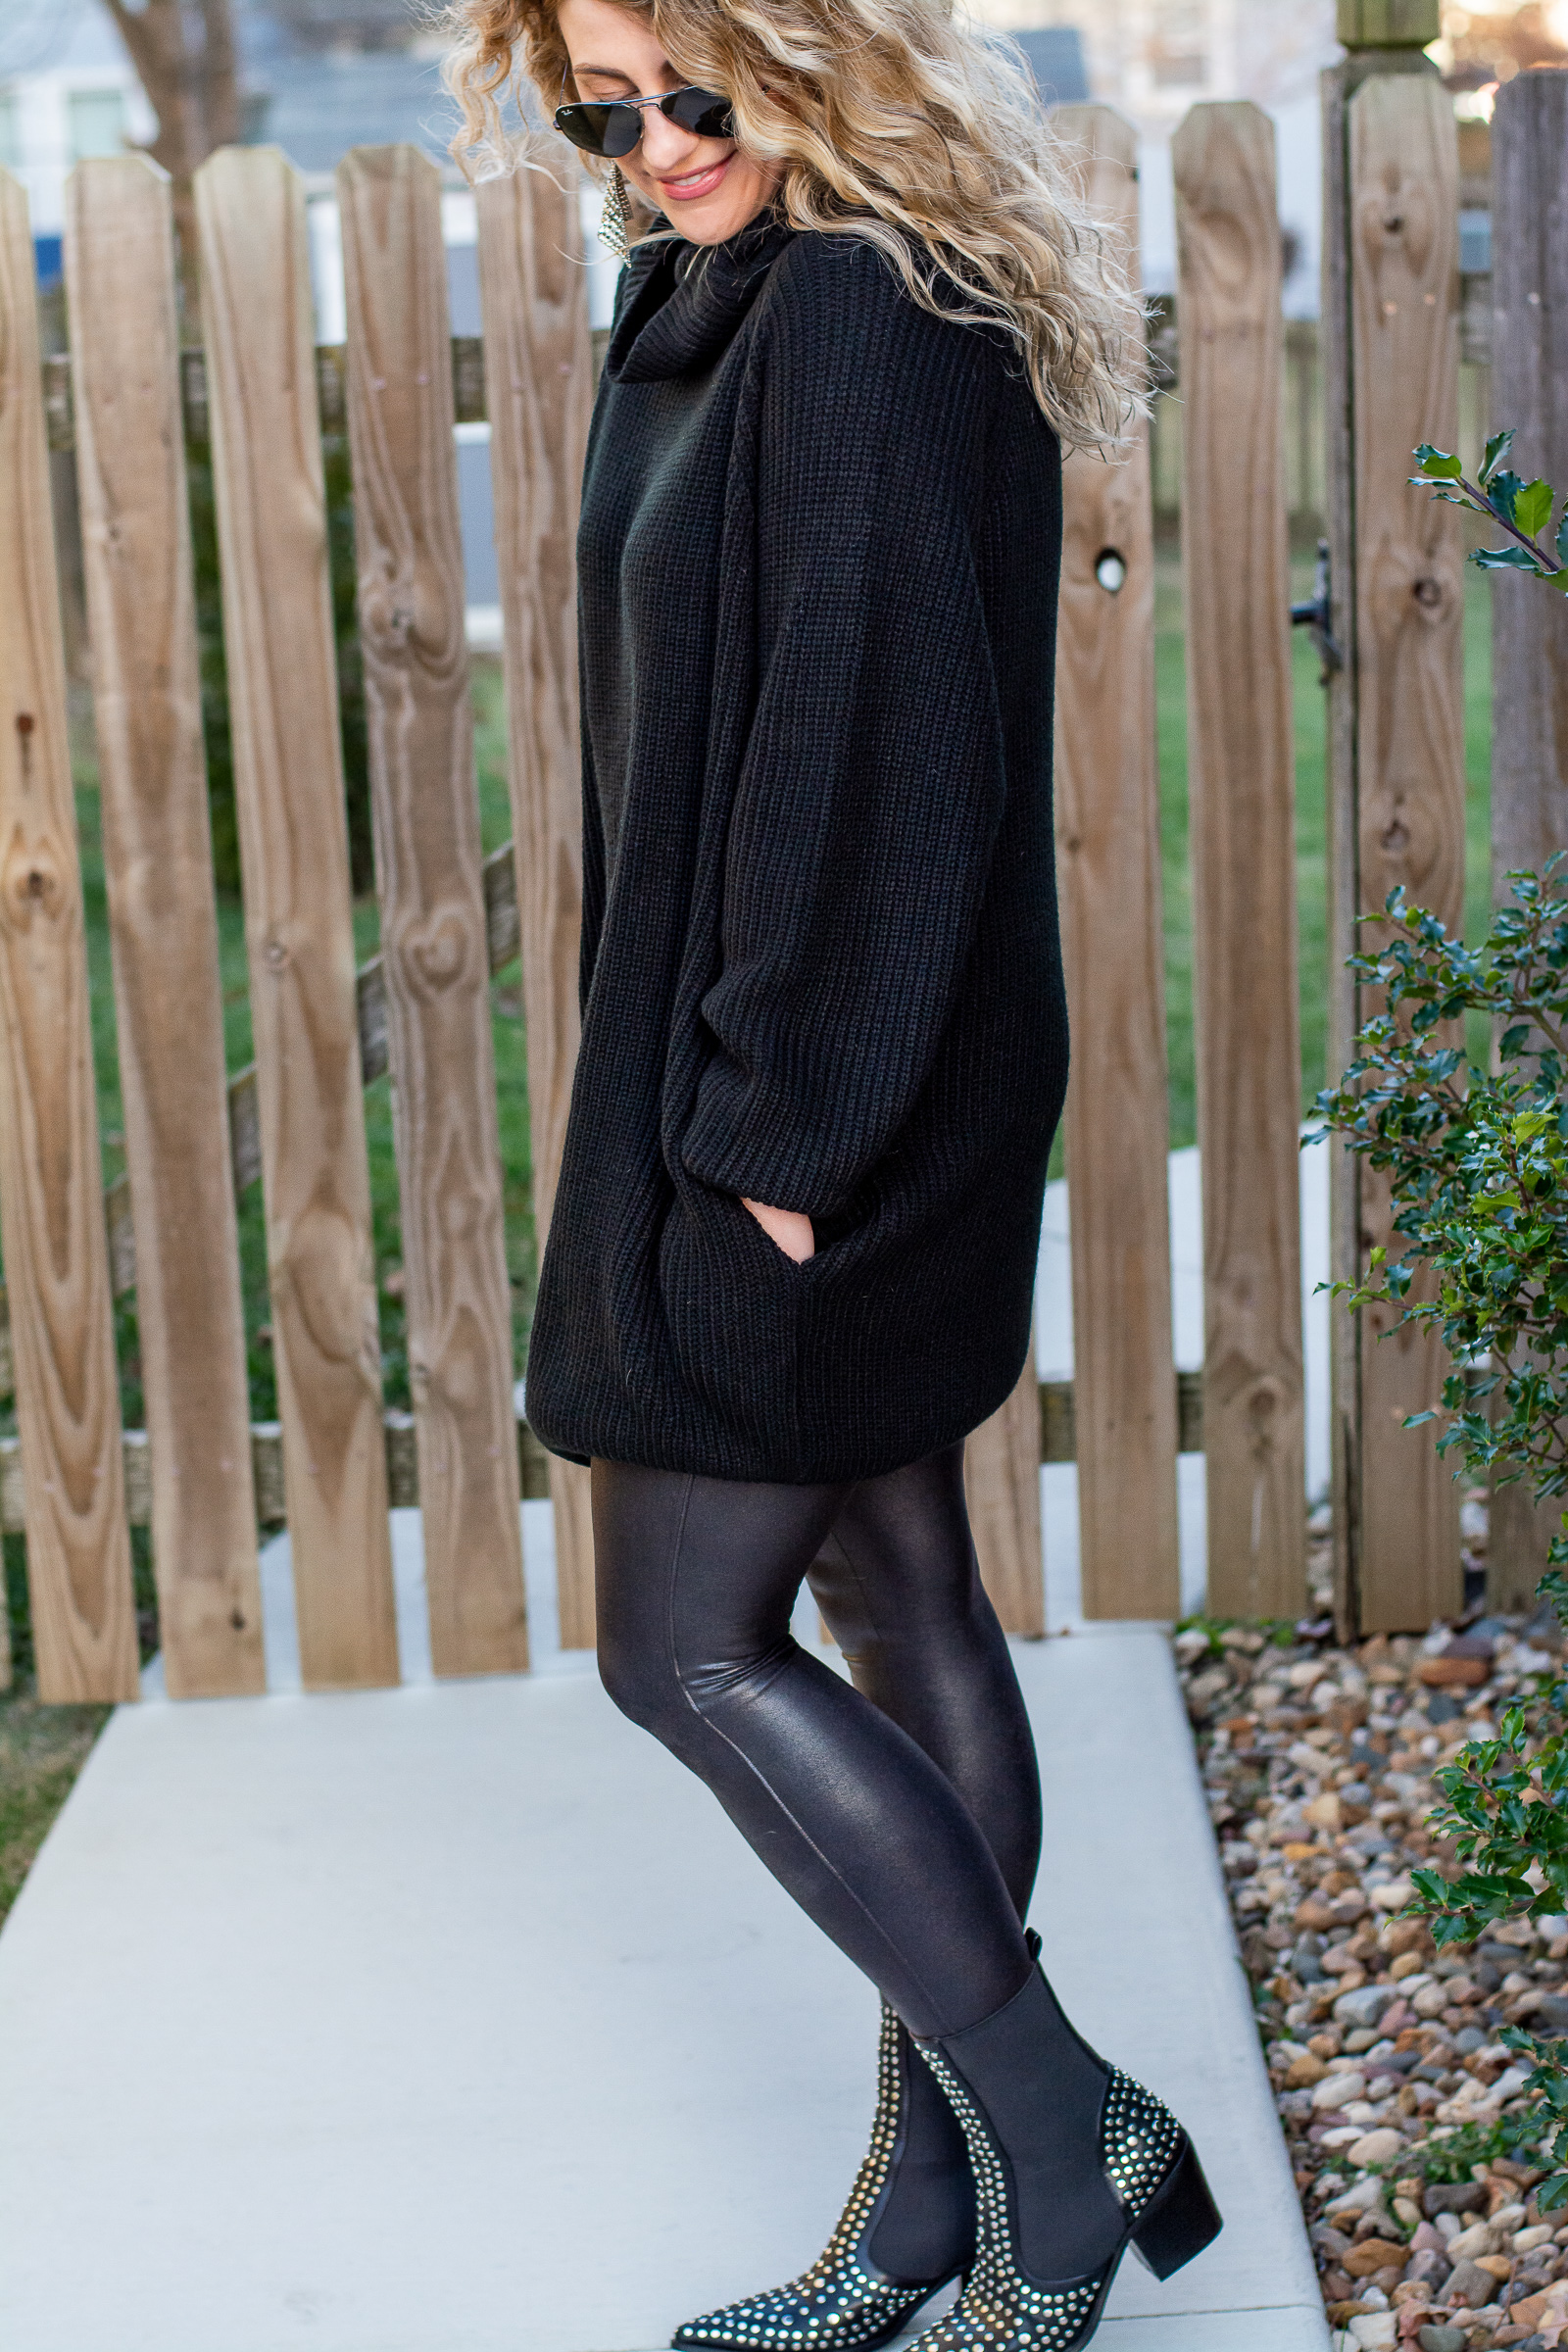 How to Wear a Tunic Sweater. | LSR